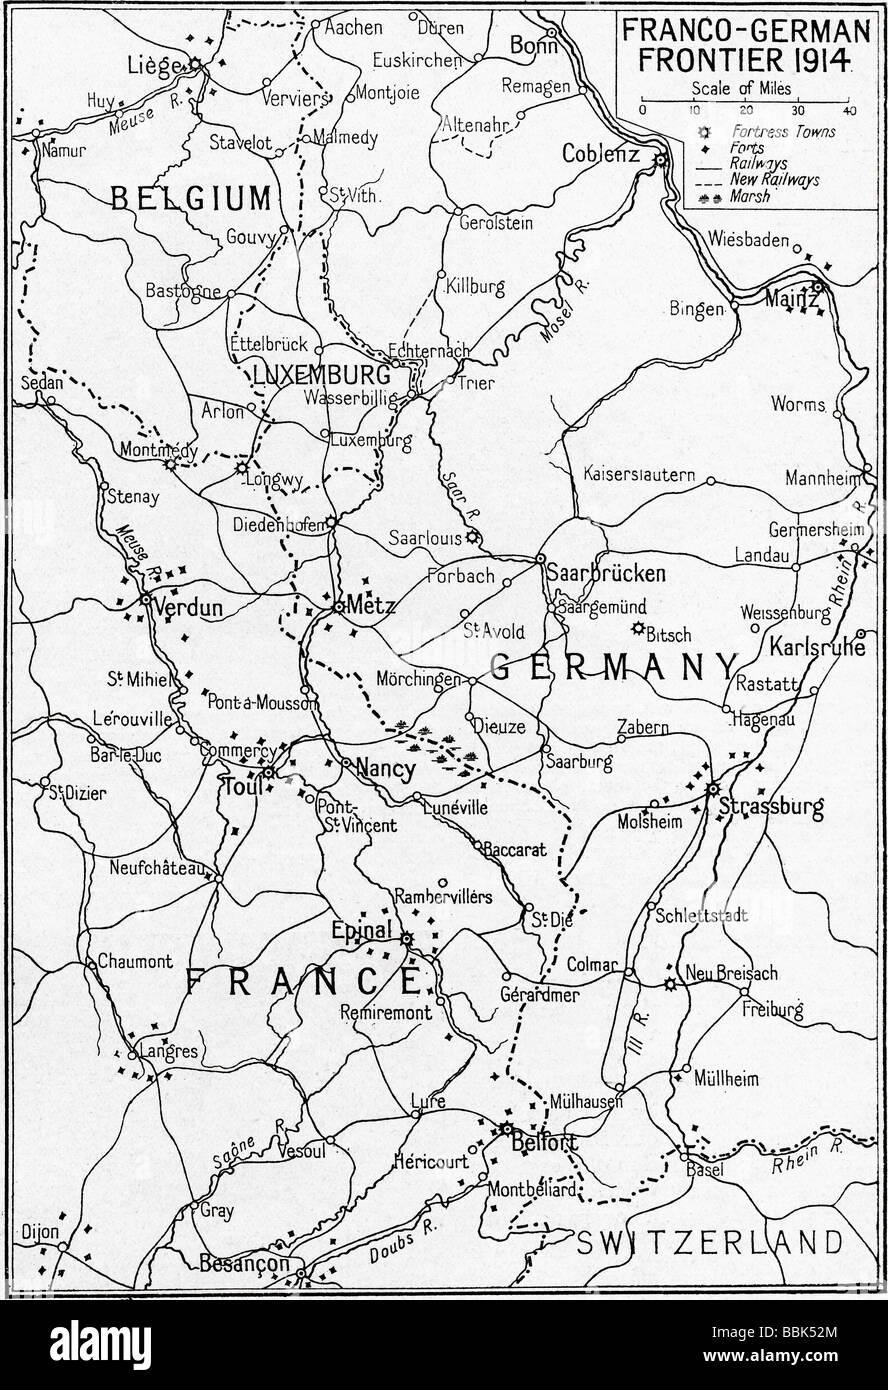 Map showing Franco German Frontier, First world war Stock Photo